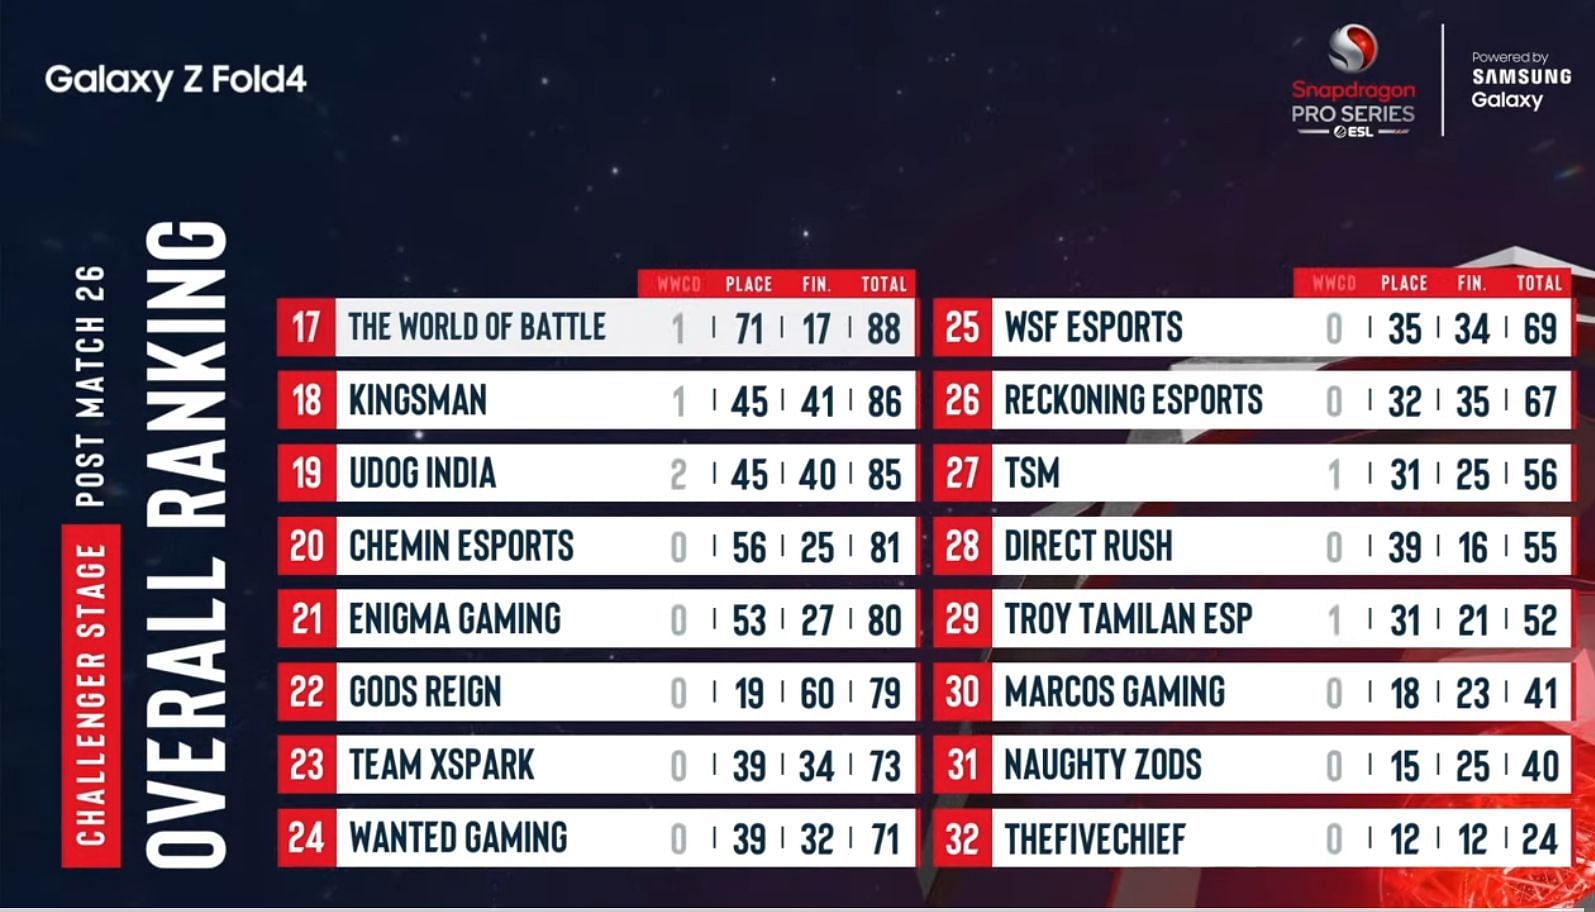 TSM placed 27th after PUBG New State Mobile Challenger Day 5 (Image via Nodwin Gaming)